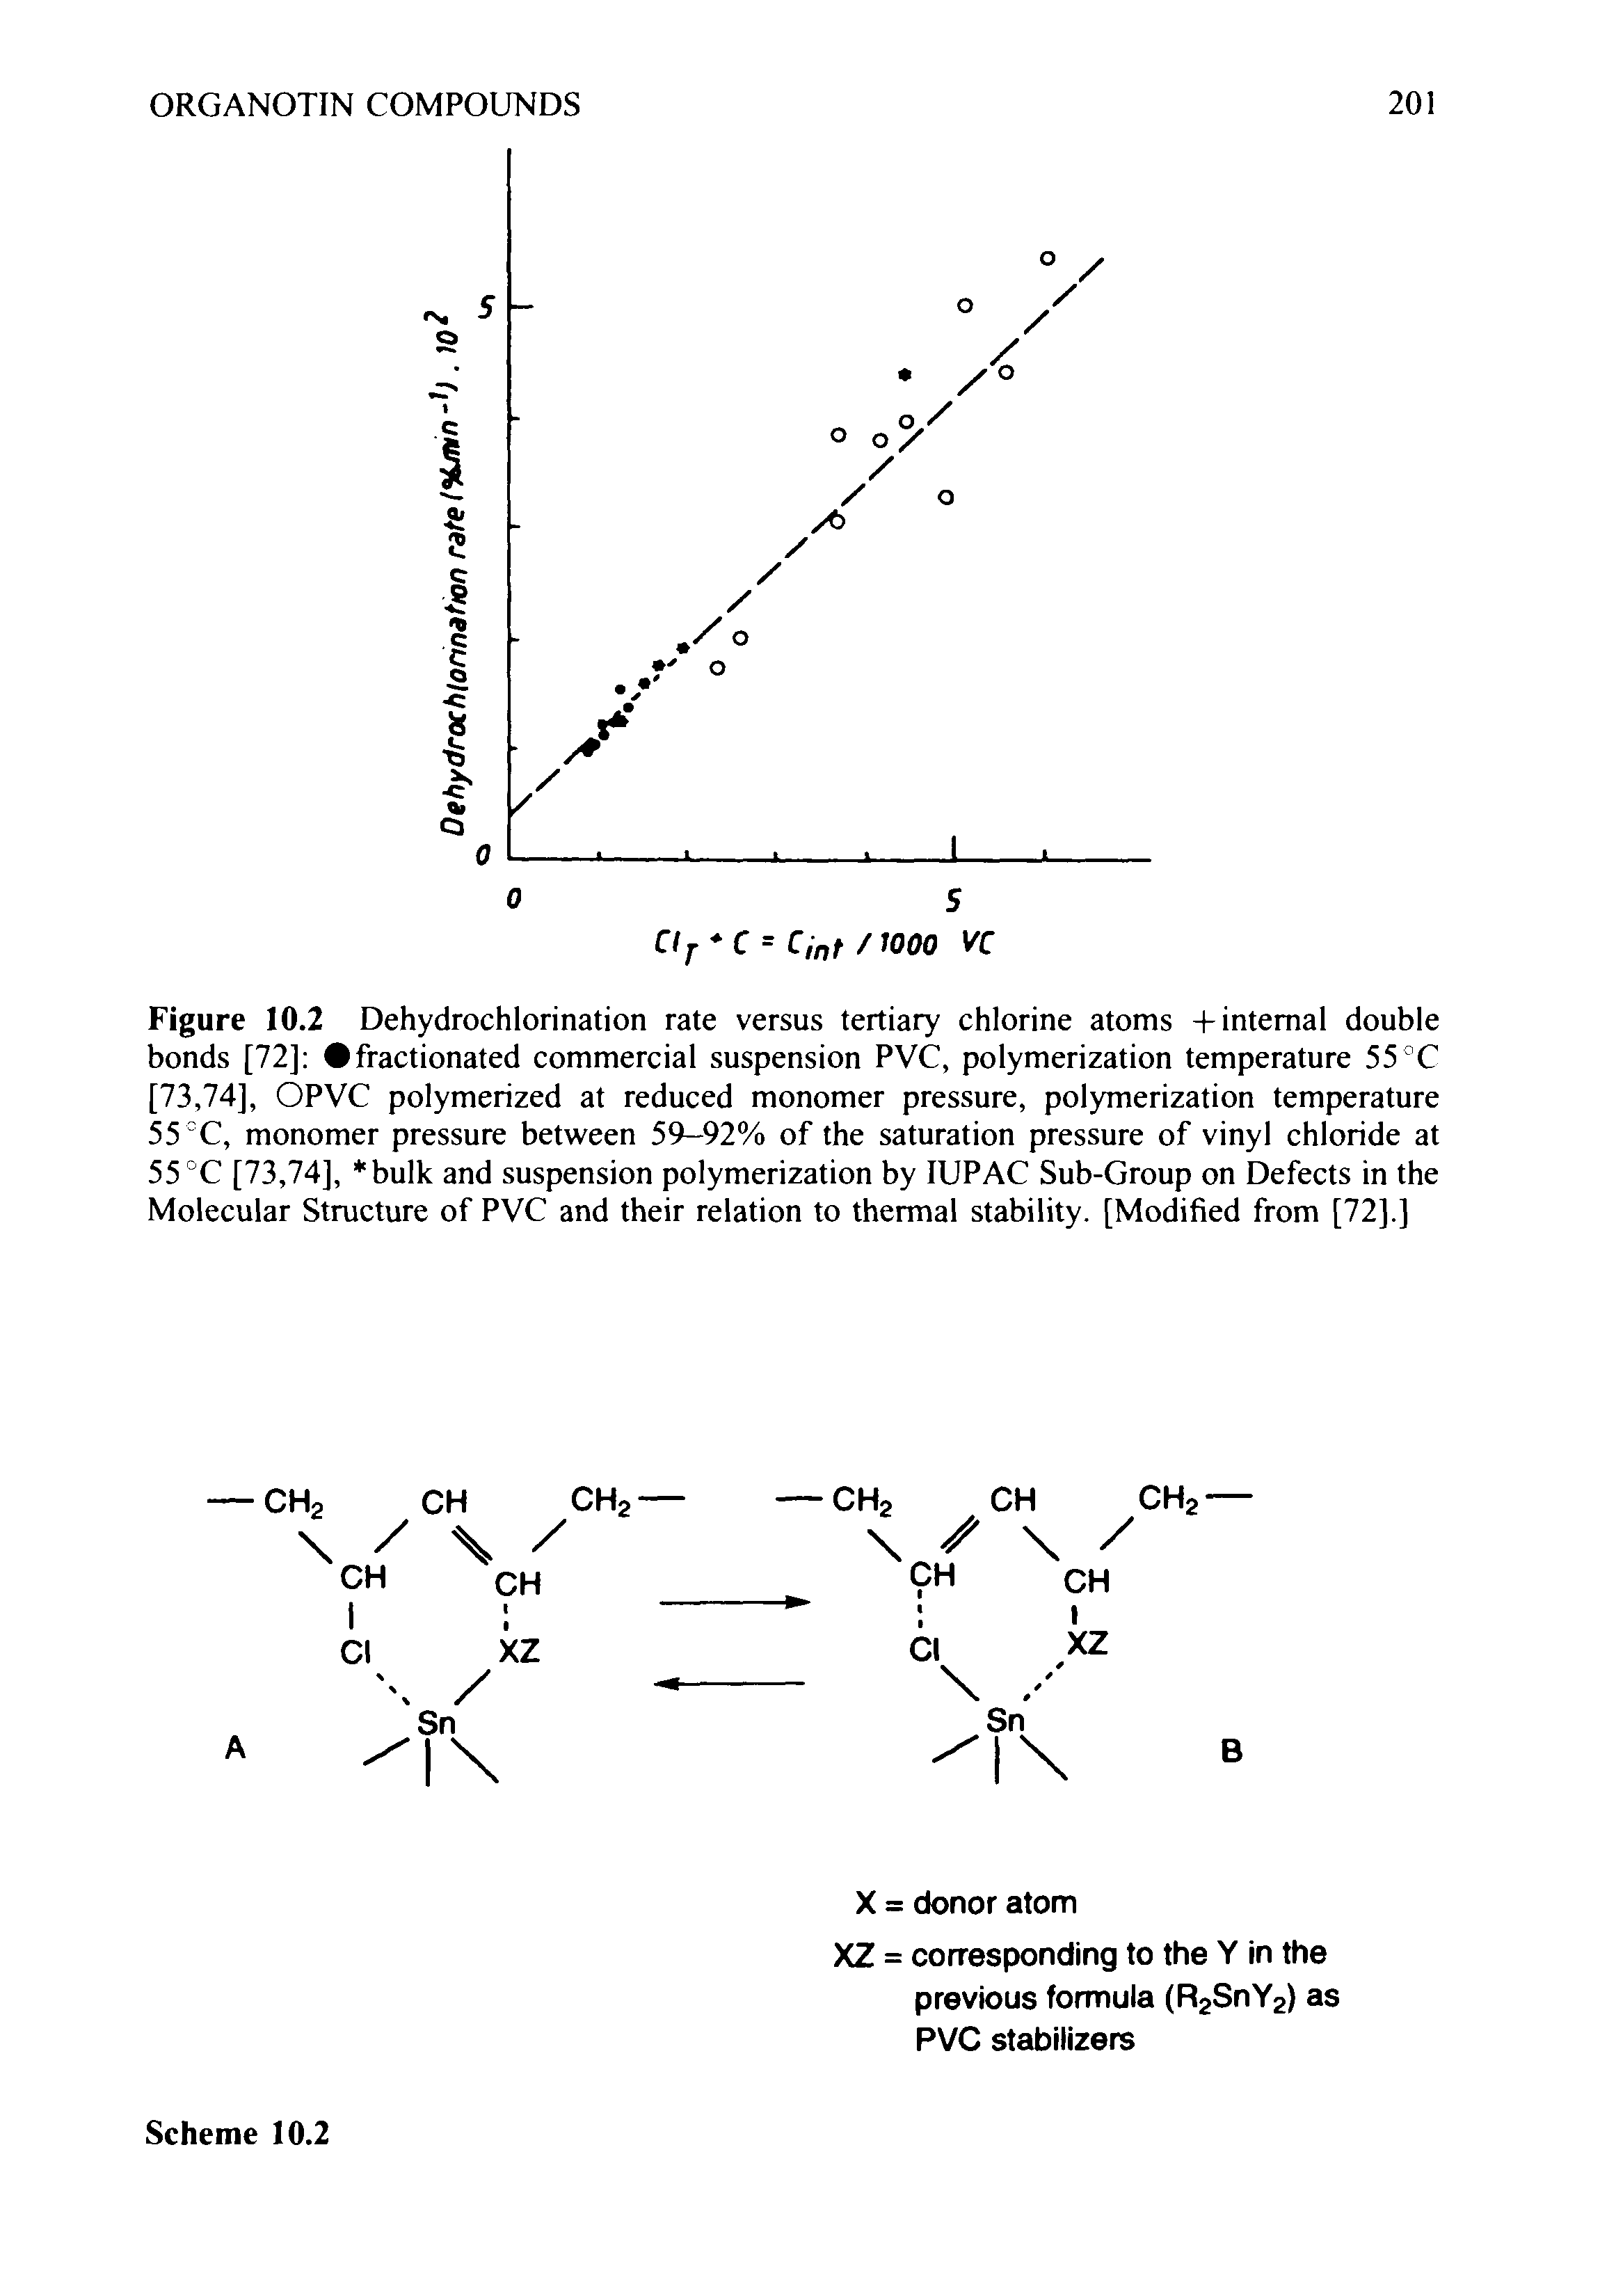 Figure 10.2 Dehydrochlorination rate versus tertiary chlorine atoms + internal double bonds [72] fractionated commercial suspension PVC, polymerization temperature 55°C [73,74], OPVC polymerized at reduced monomer pressure, polymerization temperature 55 C, monomer pressure between 59-92% of the saturation pressure of vinyl chloride at 55 °C [73,74], bulk and suspension polymerization by lUPAC Sub-Group on Defects in the Molecular Structure of PVC and their relation to thermal stability. [Modified from [72].]...